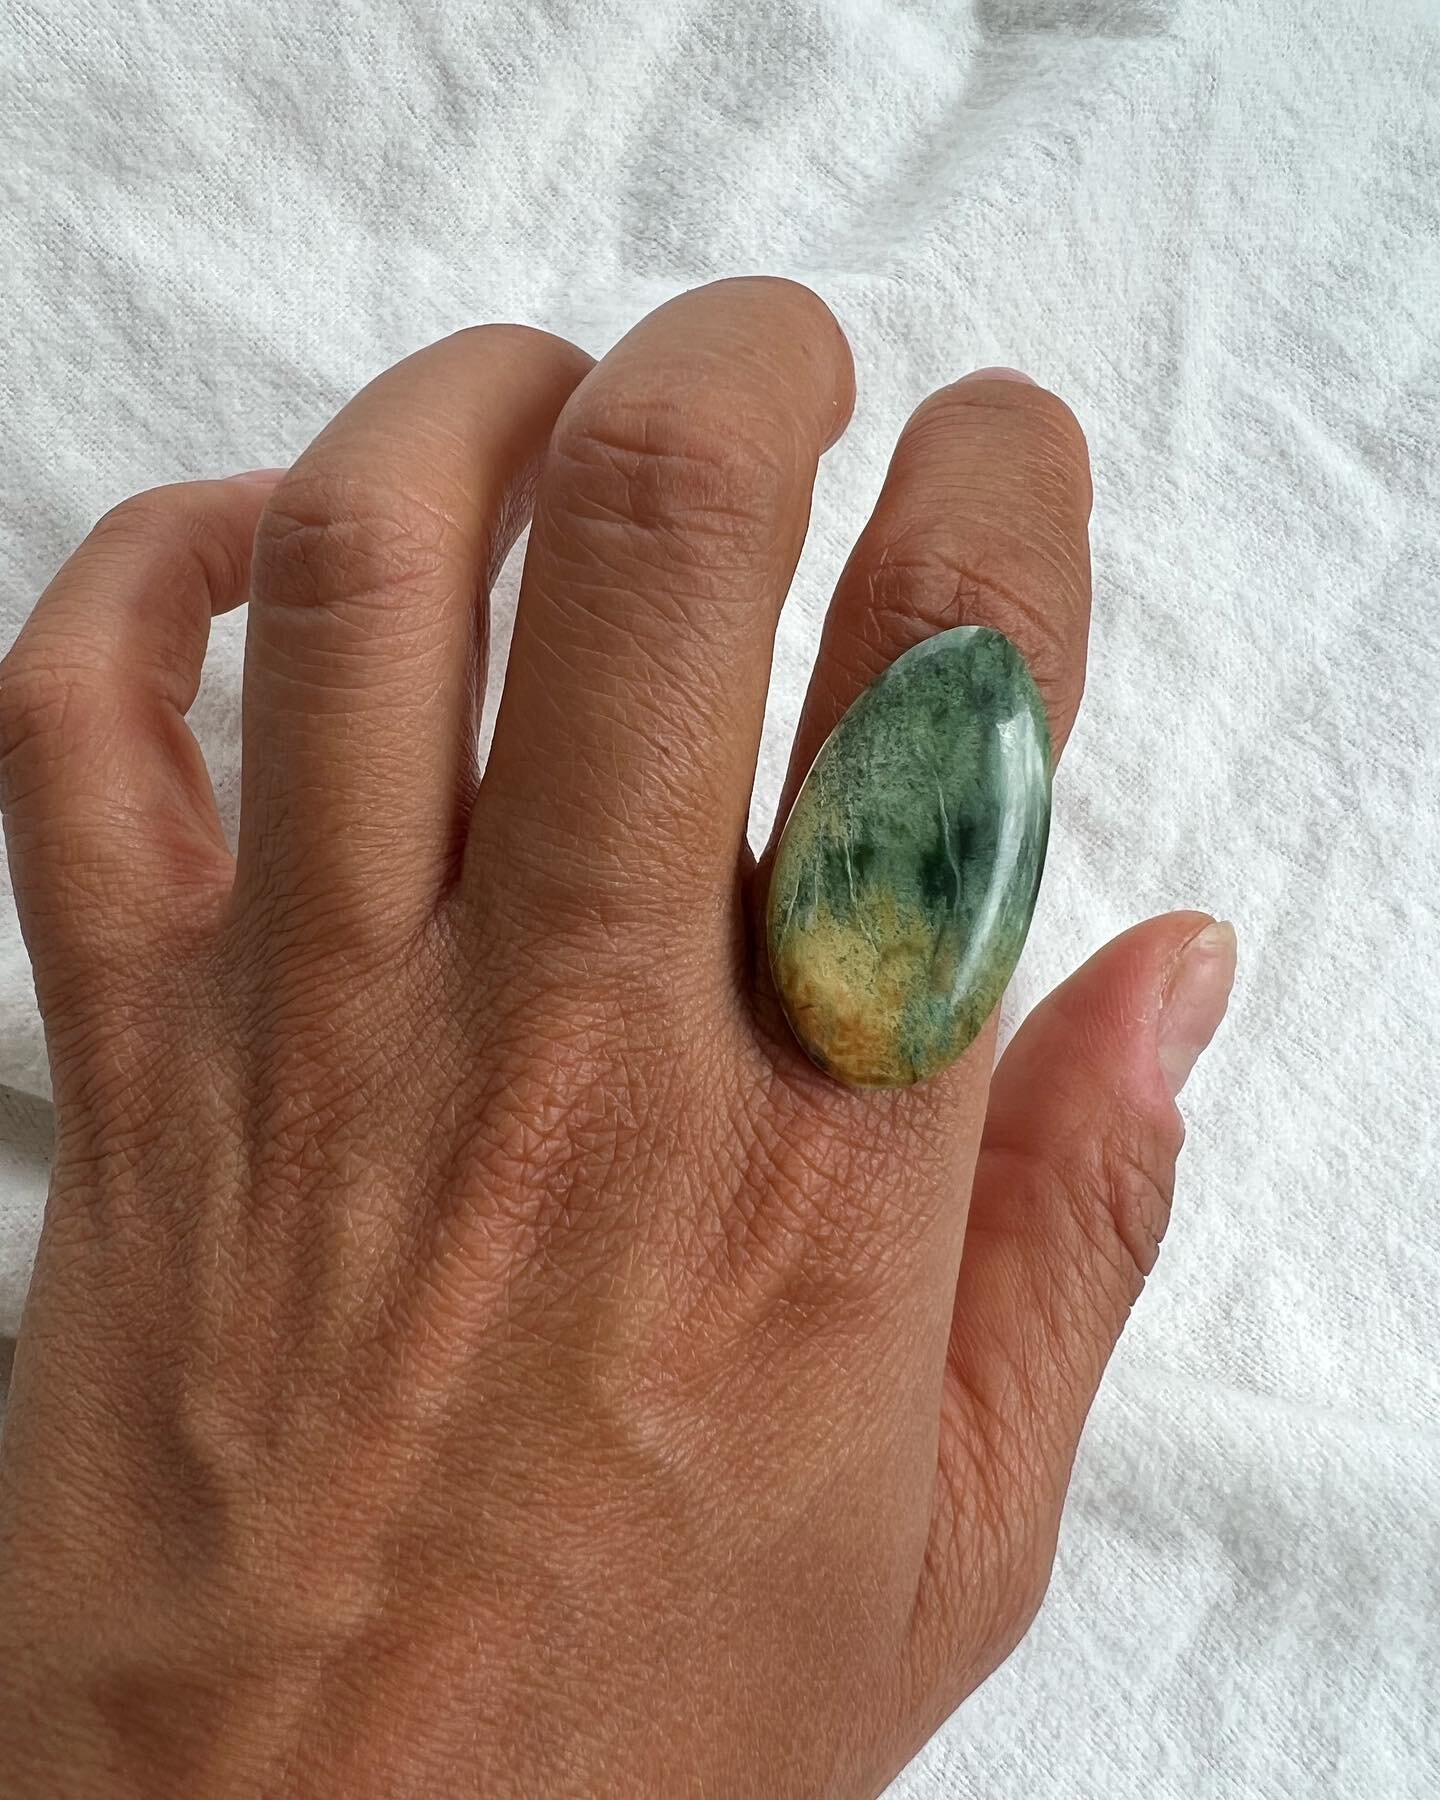 The ring is not finished yet, but I am excited to see what it will look like when the stone arrives and I come up with a design.
This stone is the only one in the world, no two will ever be the same size, shape, or color, and since each piece is hand